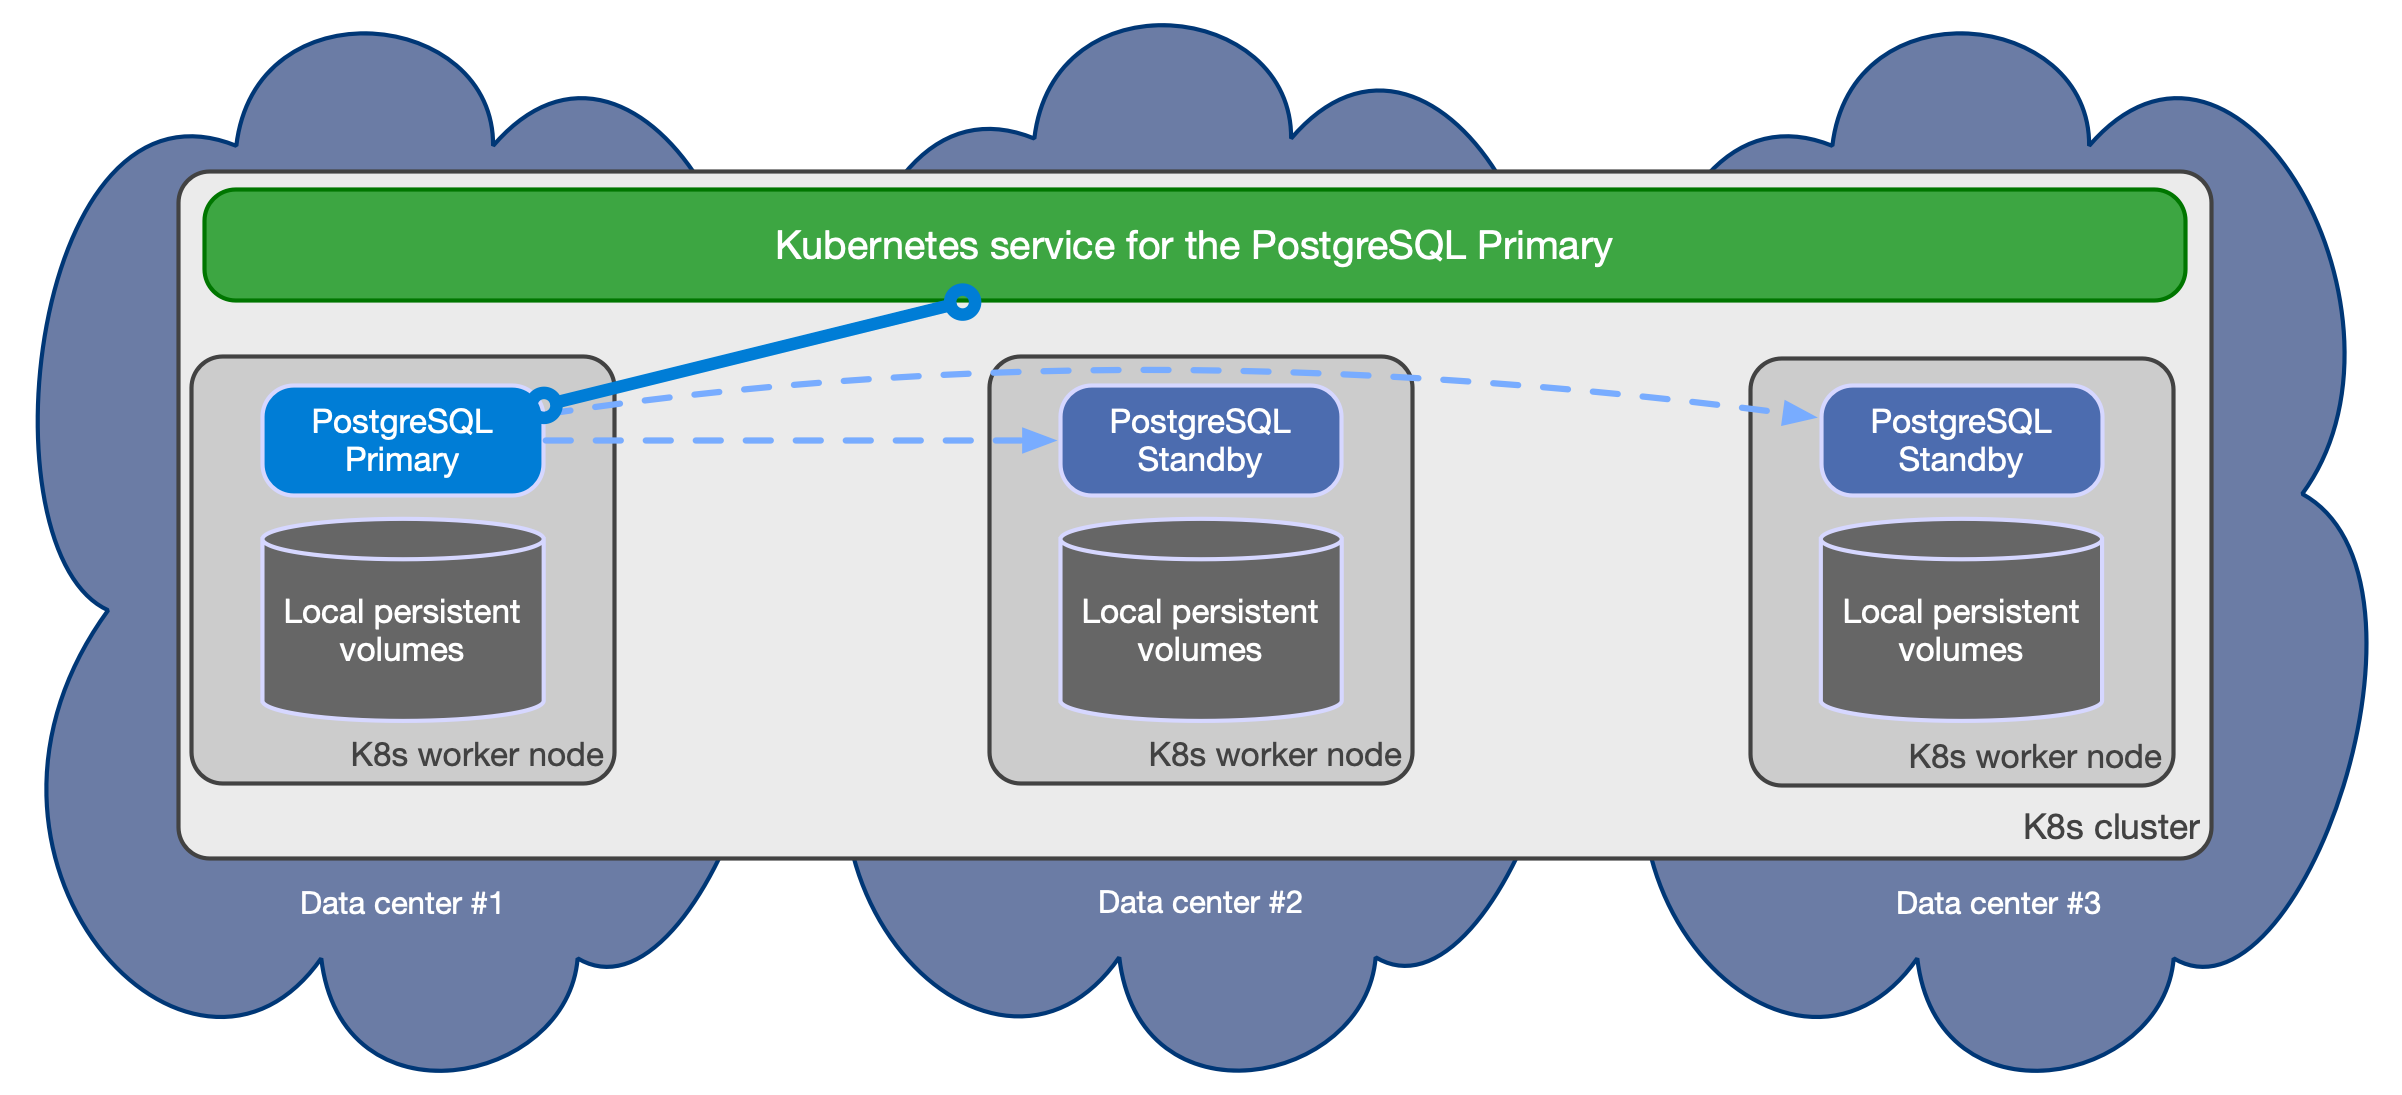 Bird-eye view of the recommended shared nothing architecture for PostgreSQL in Kubernetes